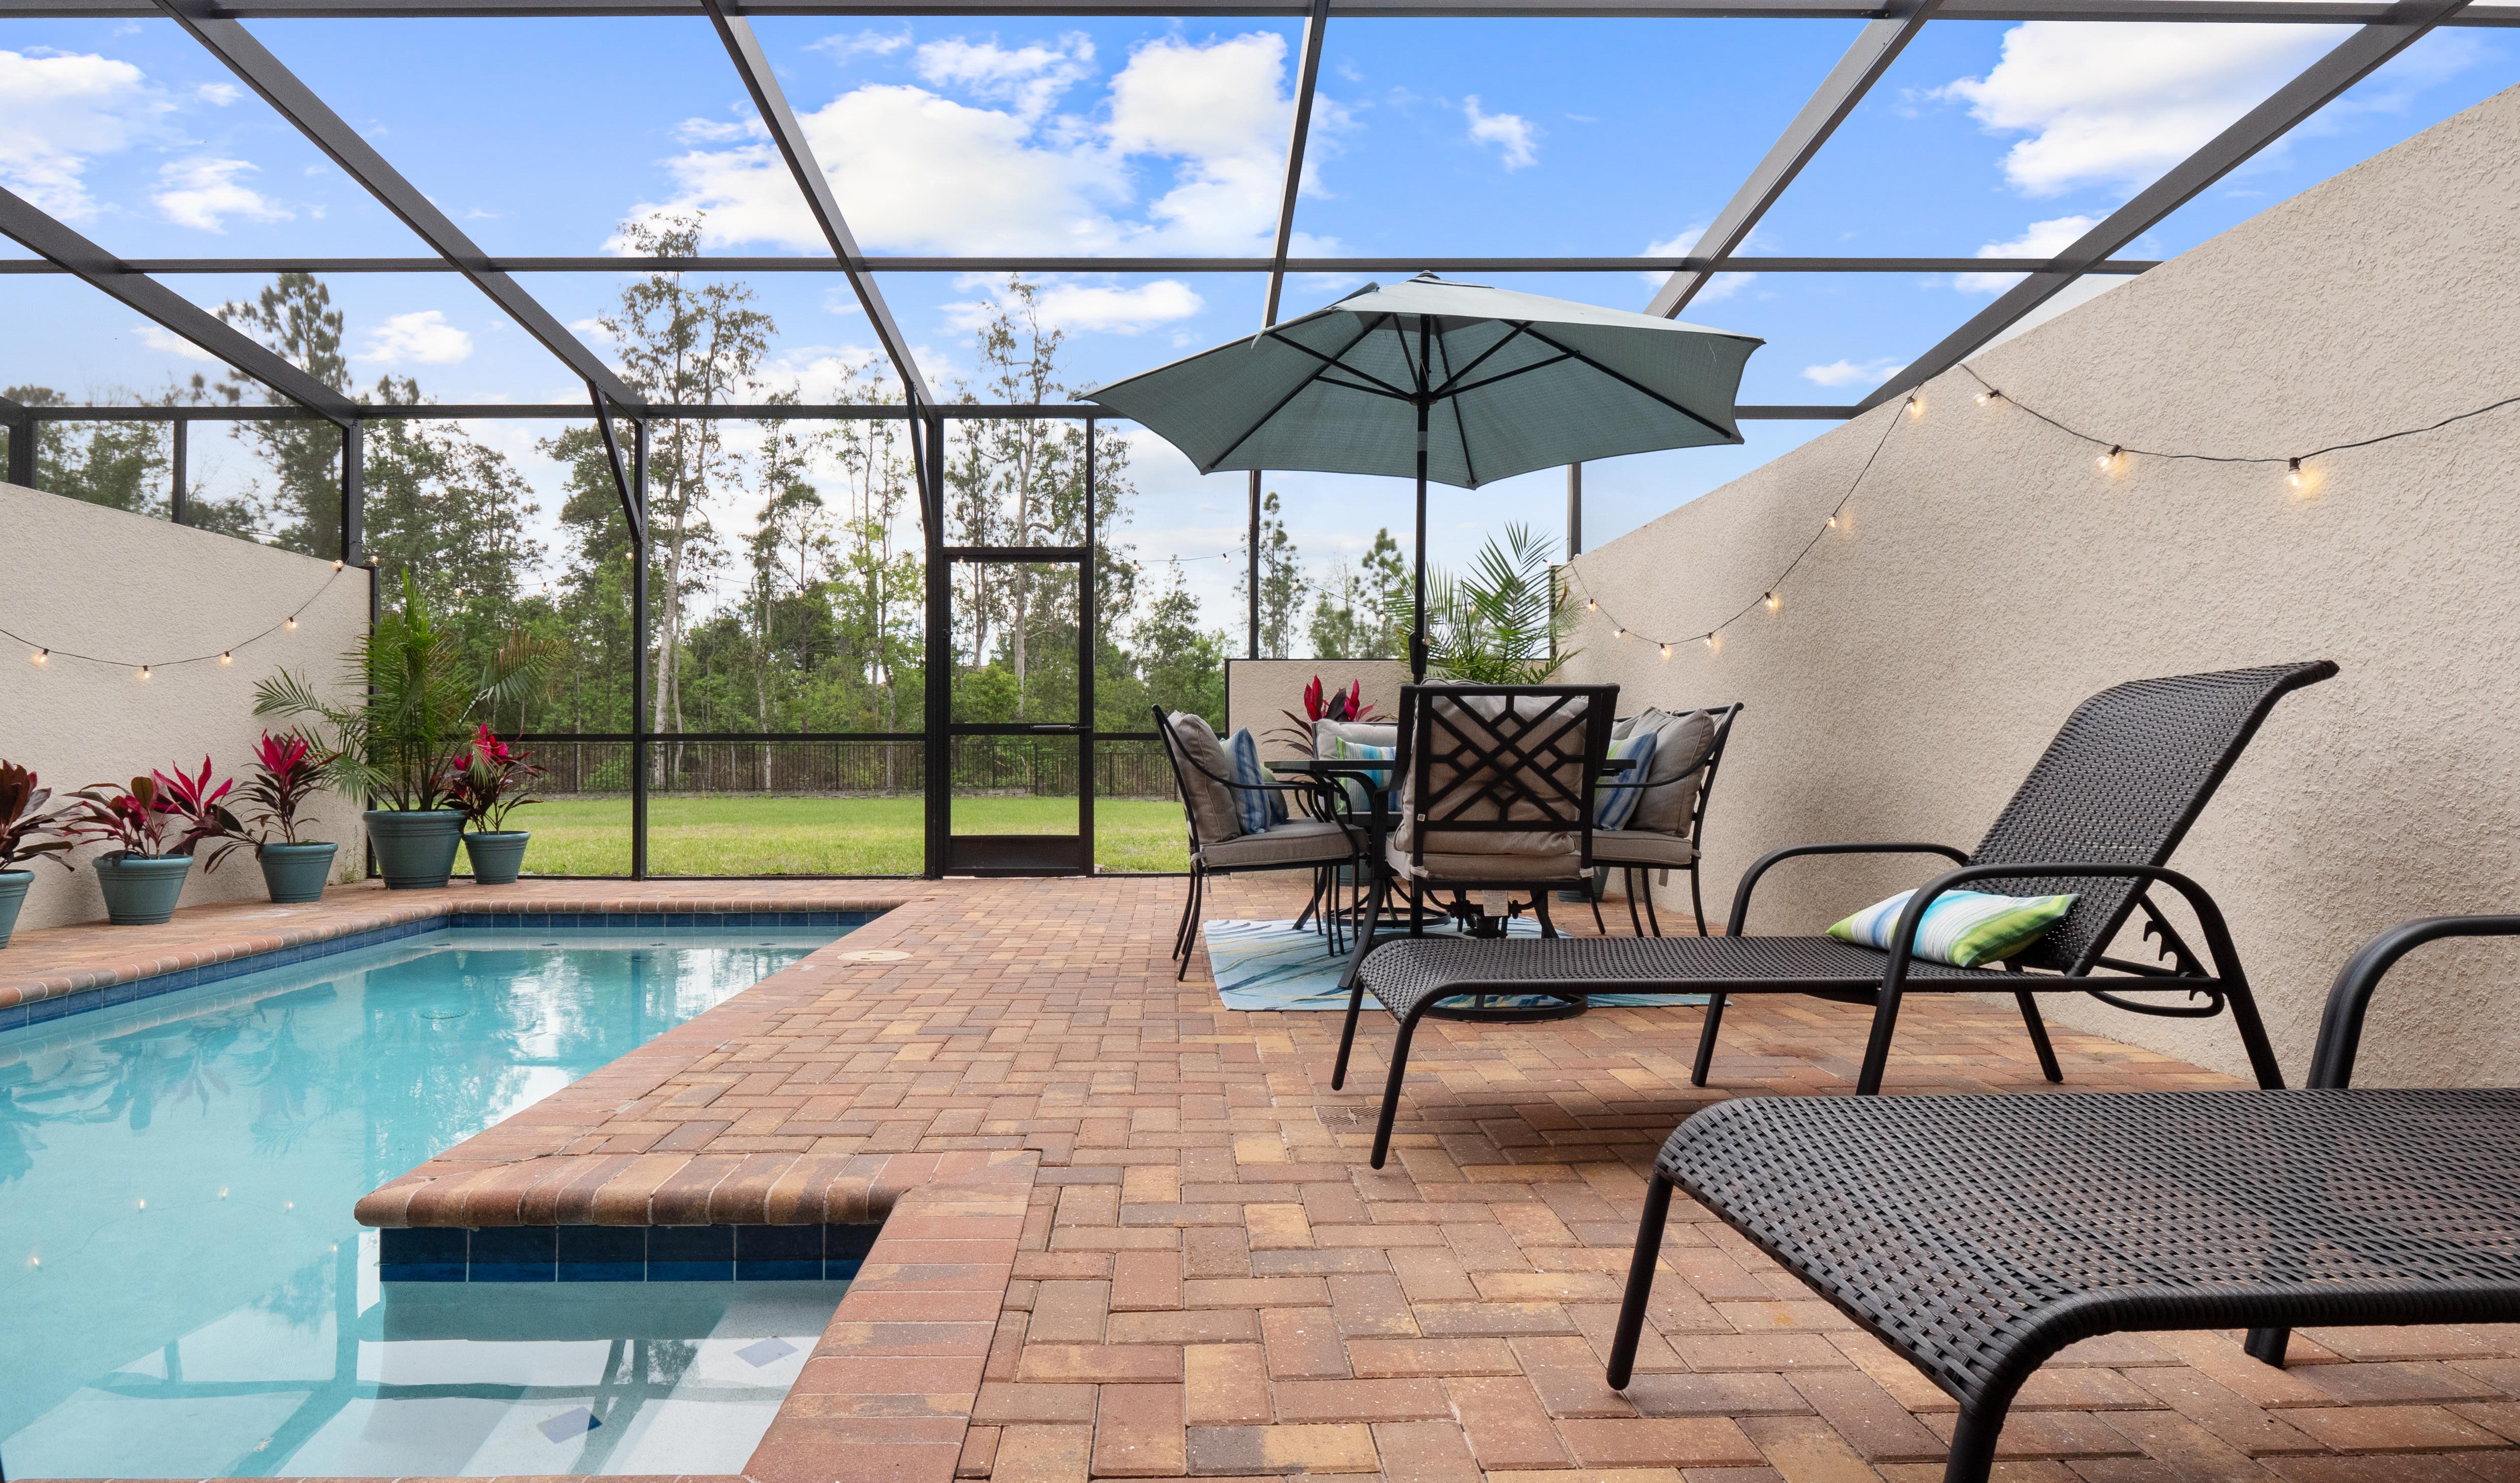 Luxurious Pool with Patio Furniture and Loungers (Pool Heat & Grill Rentals Available for Additional Fee)